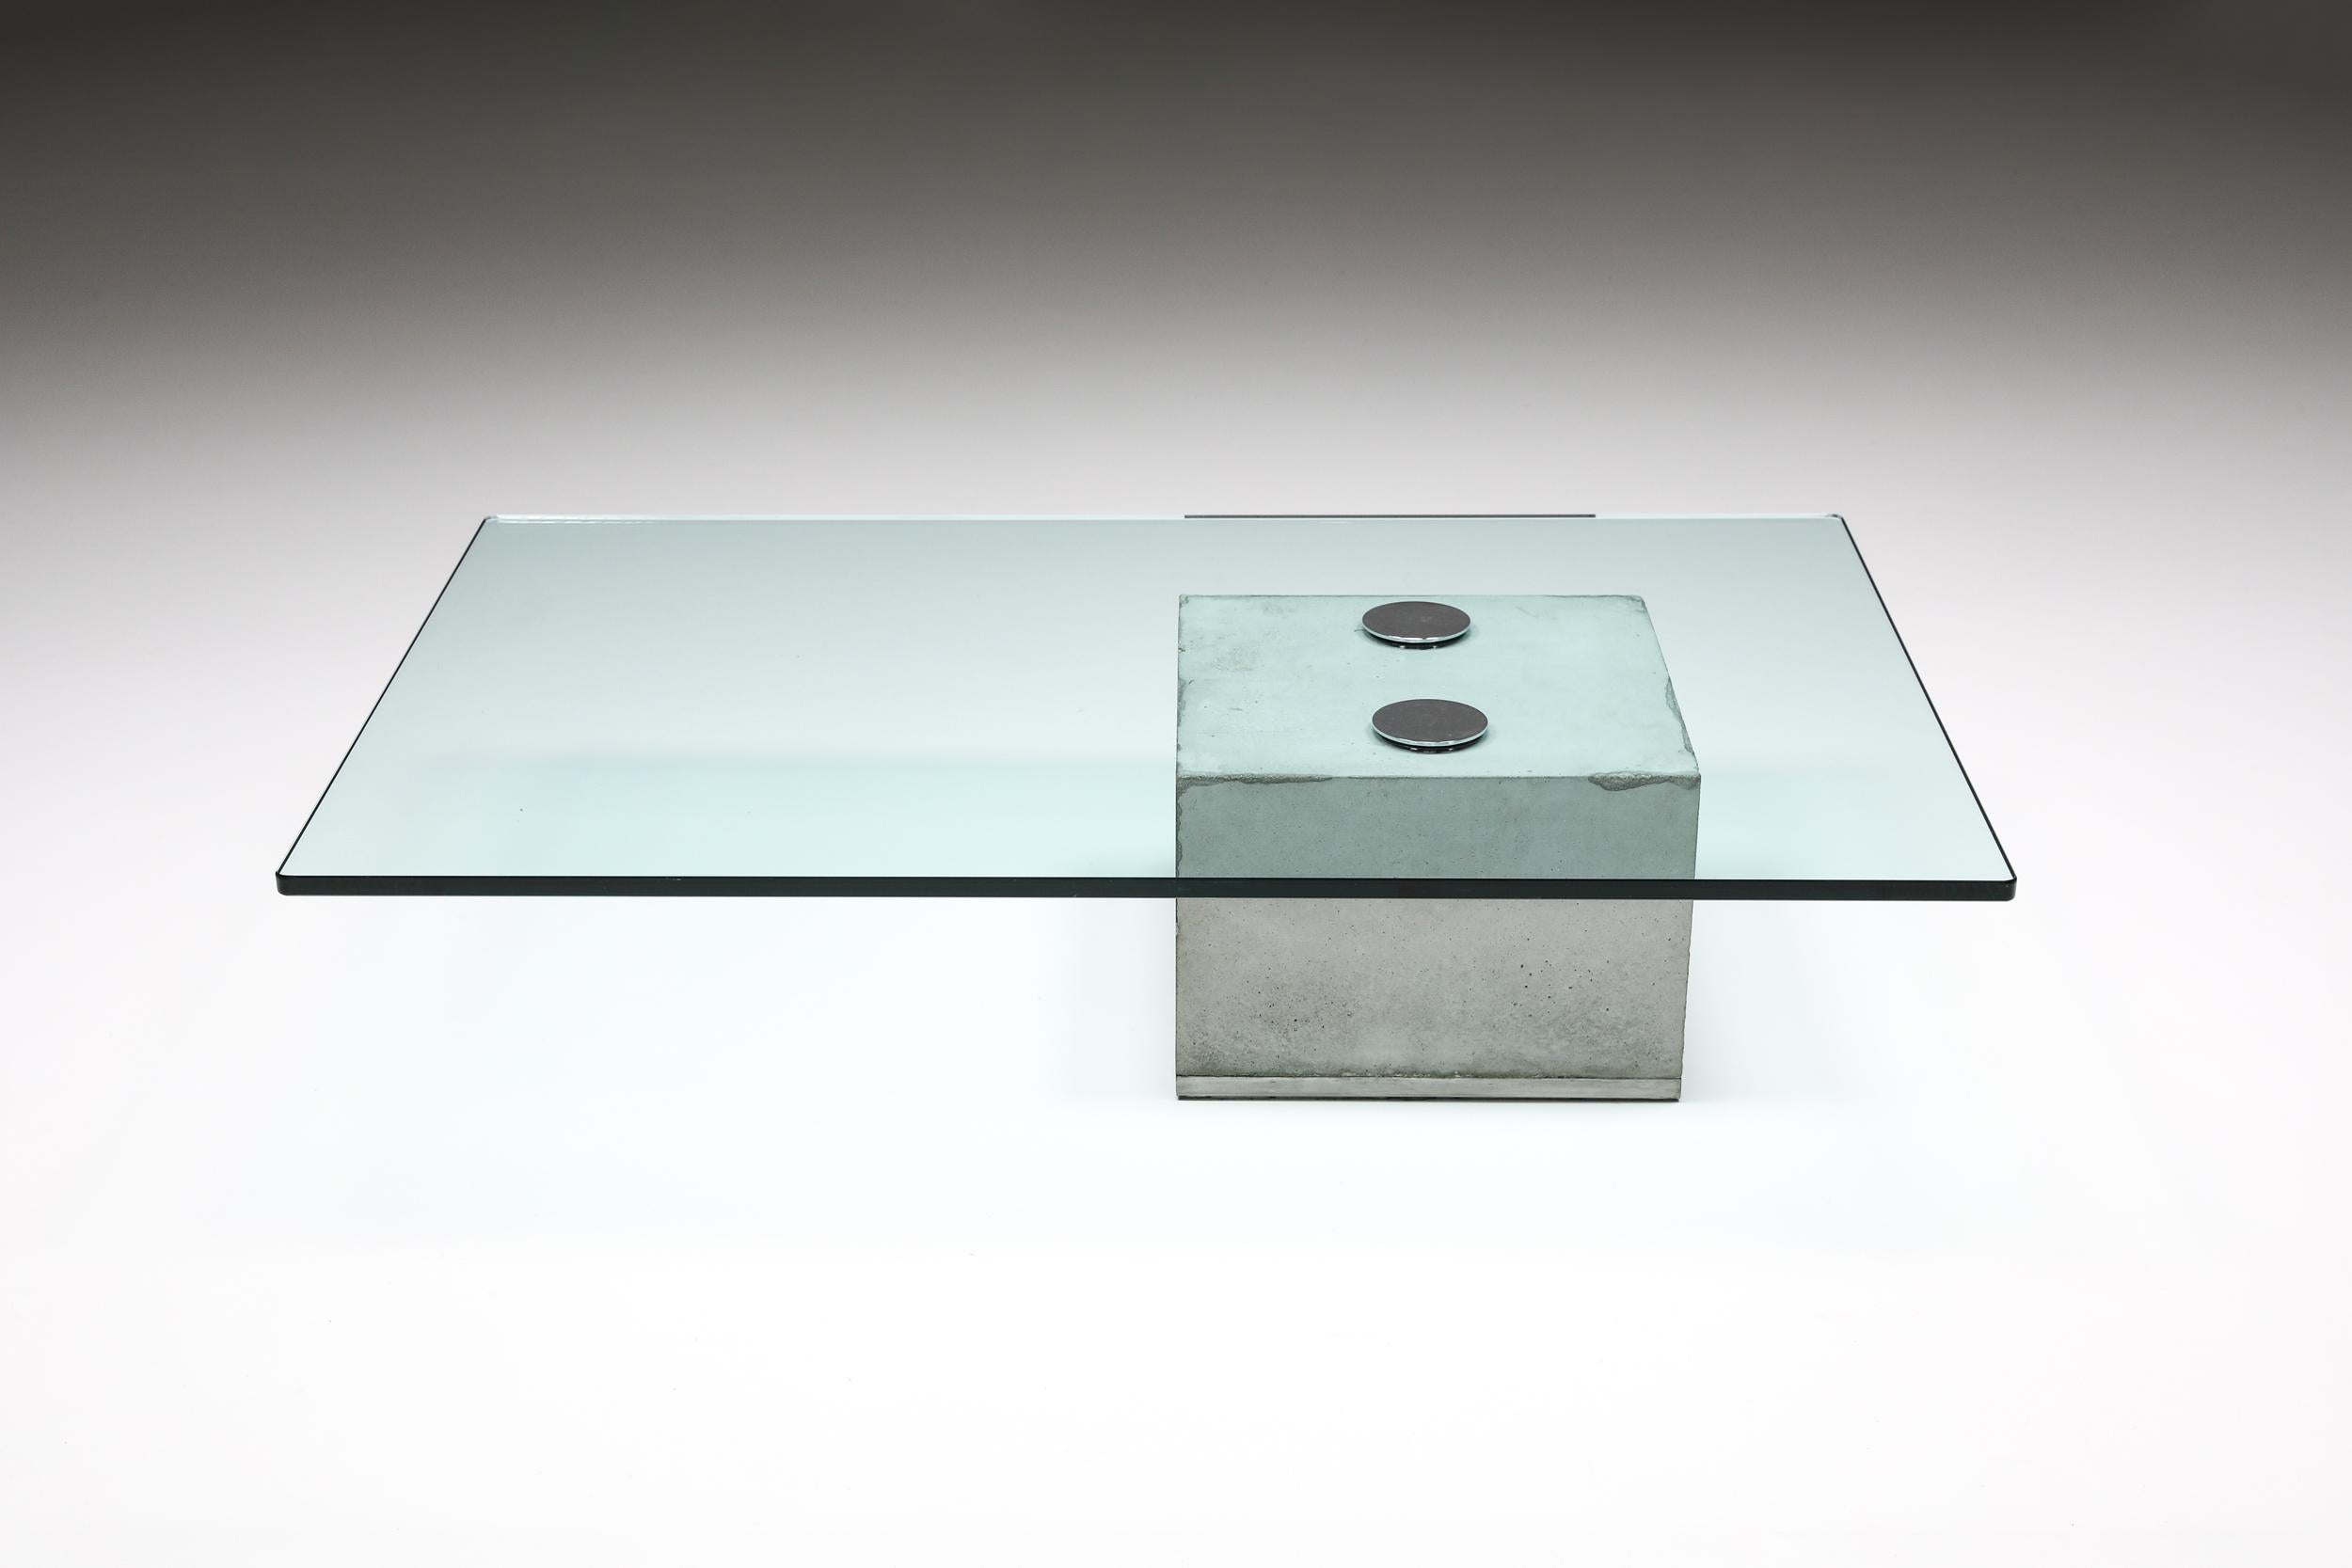 Italian design; 1970's; Saporiti; Coffee table;

Elegant minimalist SAPO coffee table by Saporiti.
The raw concrete block supports a glass top secured by two polished chrome knobs to create a sleek coffee table.